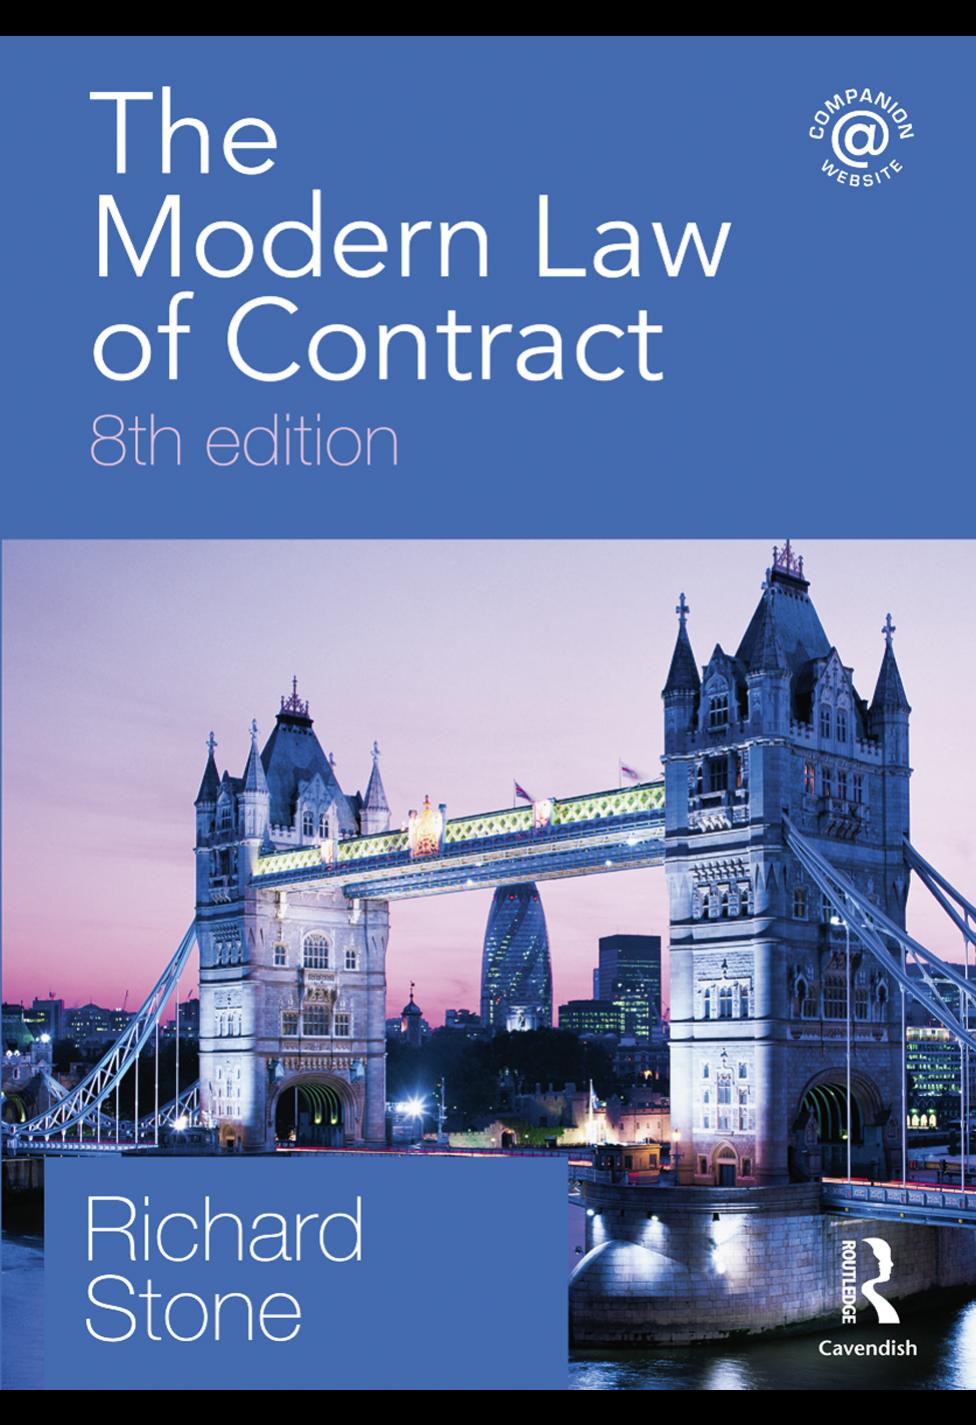 THE MODERN LAW OF CONTRACT, Eighth Edition